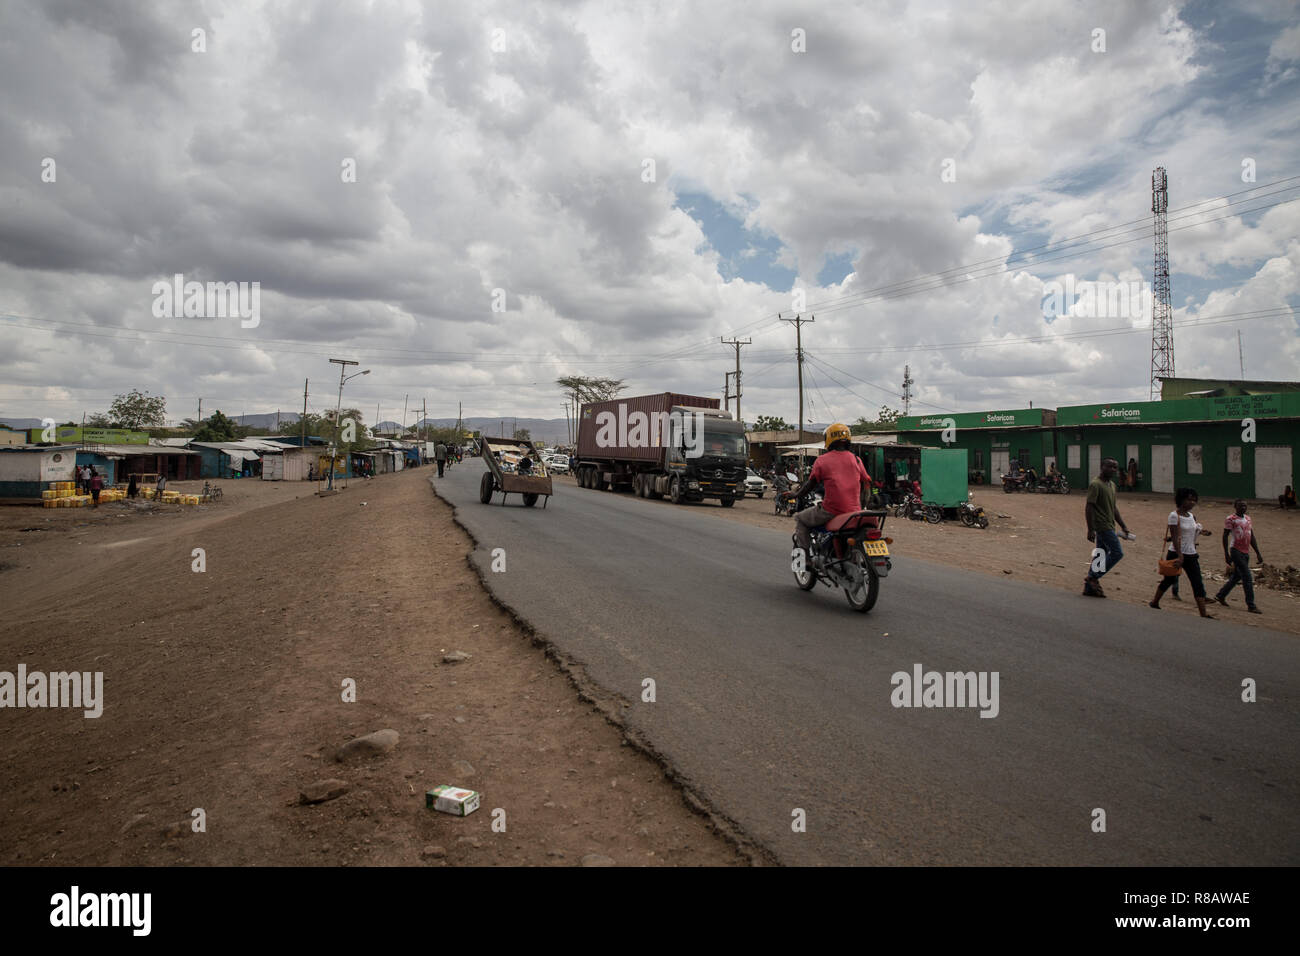 View of a high way road going through Kakuma town. Kakuma refugee camp in northwest Kenya is home to more than 180,000 refugees and asylum seekers, from countries including Uganda, South Sudan, Sudan, Ethiopia, Tanzania and Somalia. Stock Photo